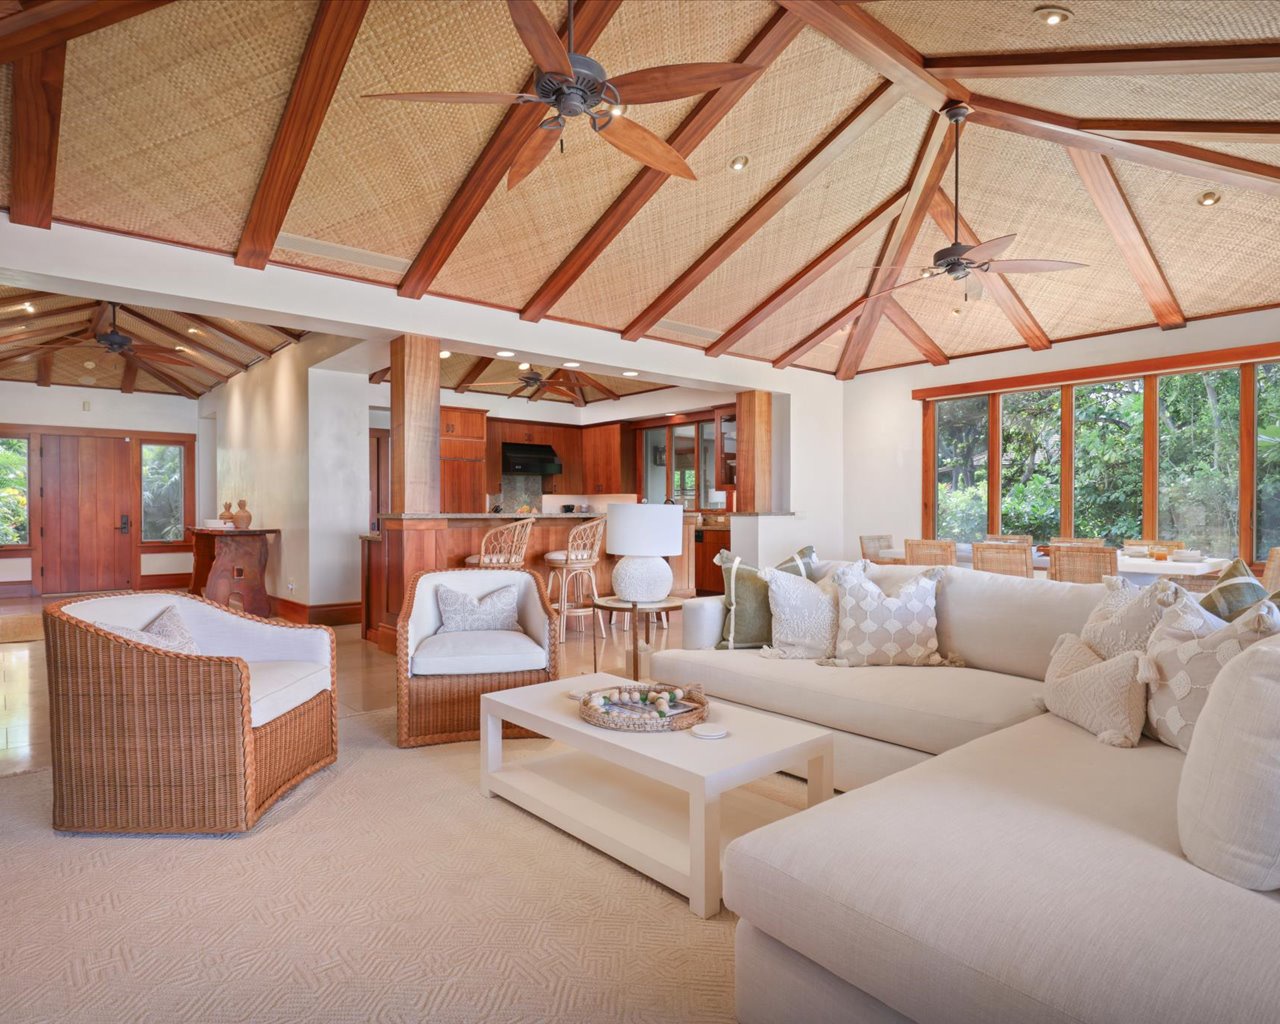 Kailua Kona Vacation Rentals, 3BD Pakui Street (131) Estate Home at Four Seasons Resort at Hualalai - Wide view of the great room & foyer featuring soaring vaulted ceilings